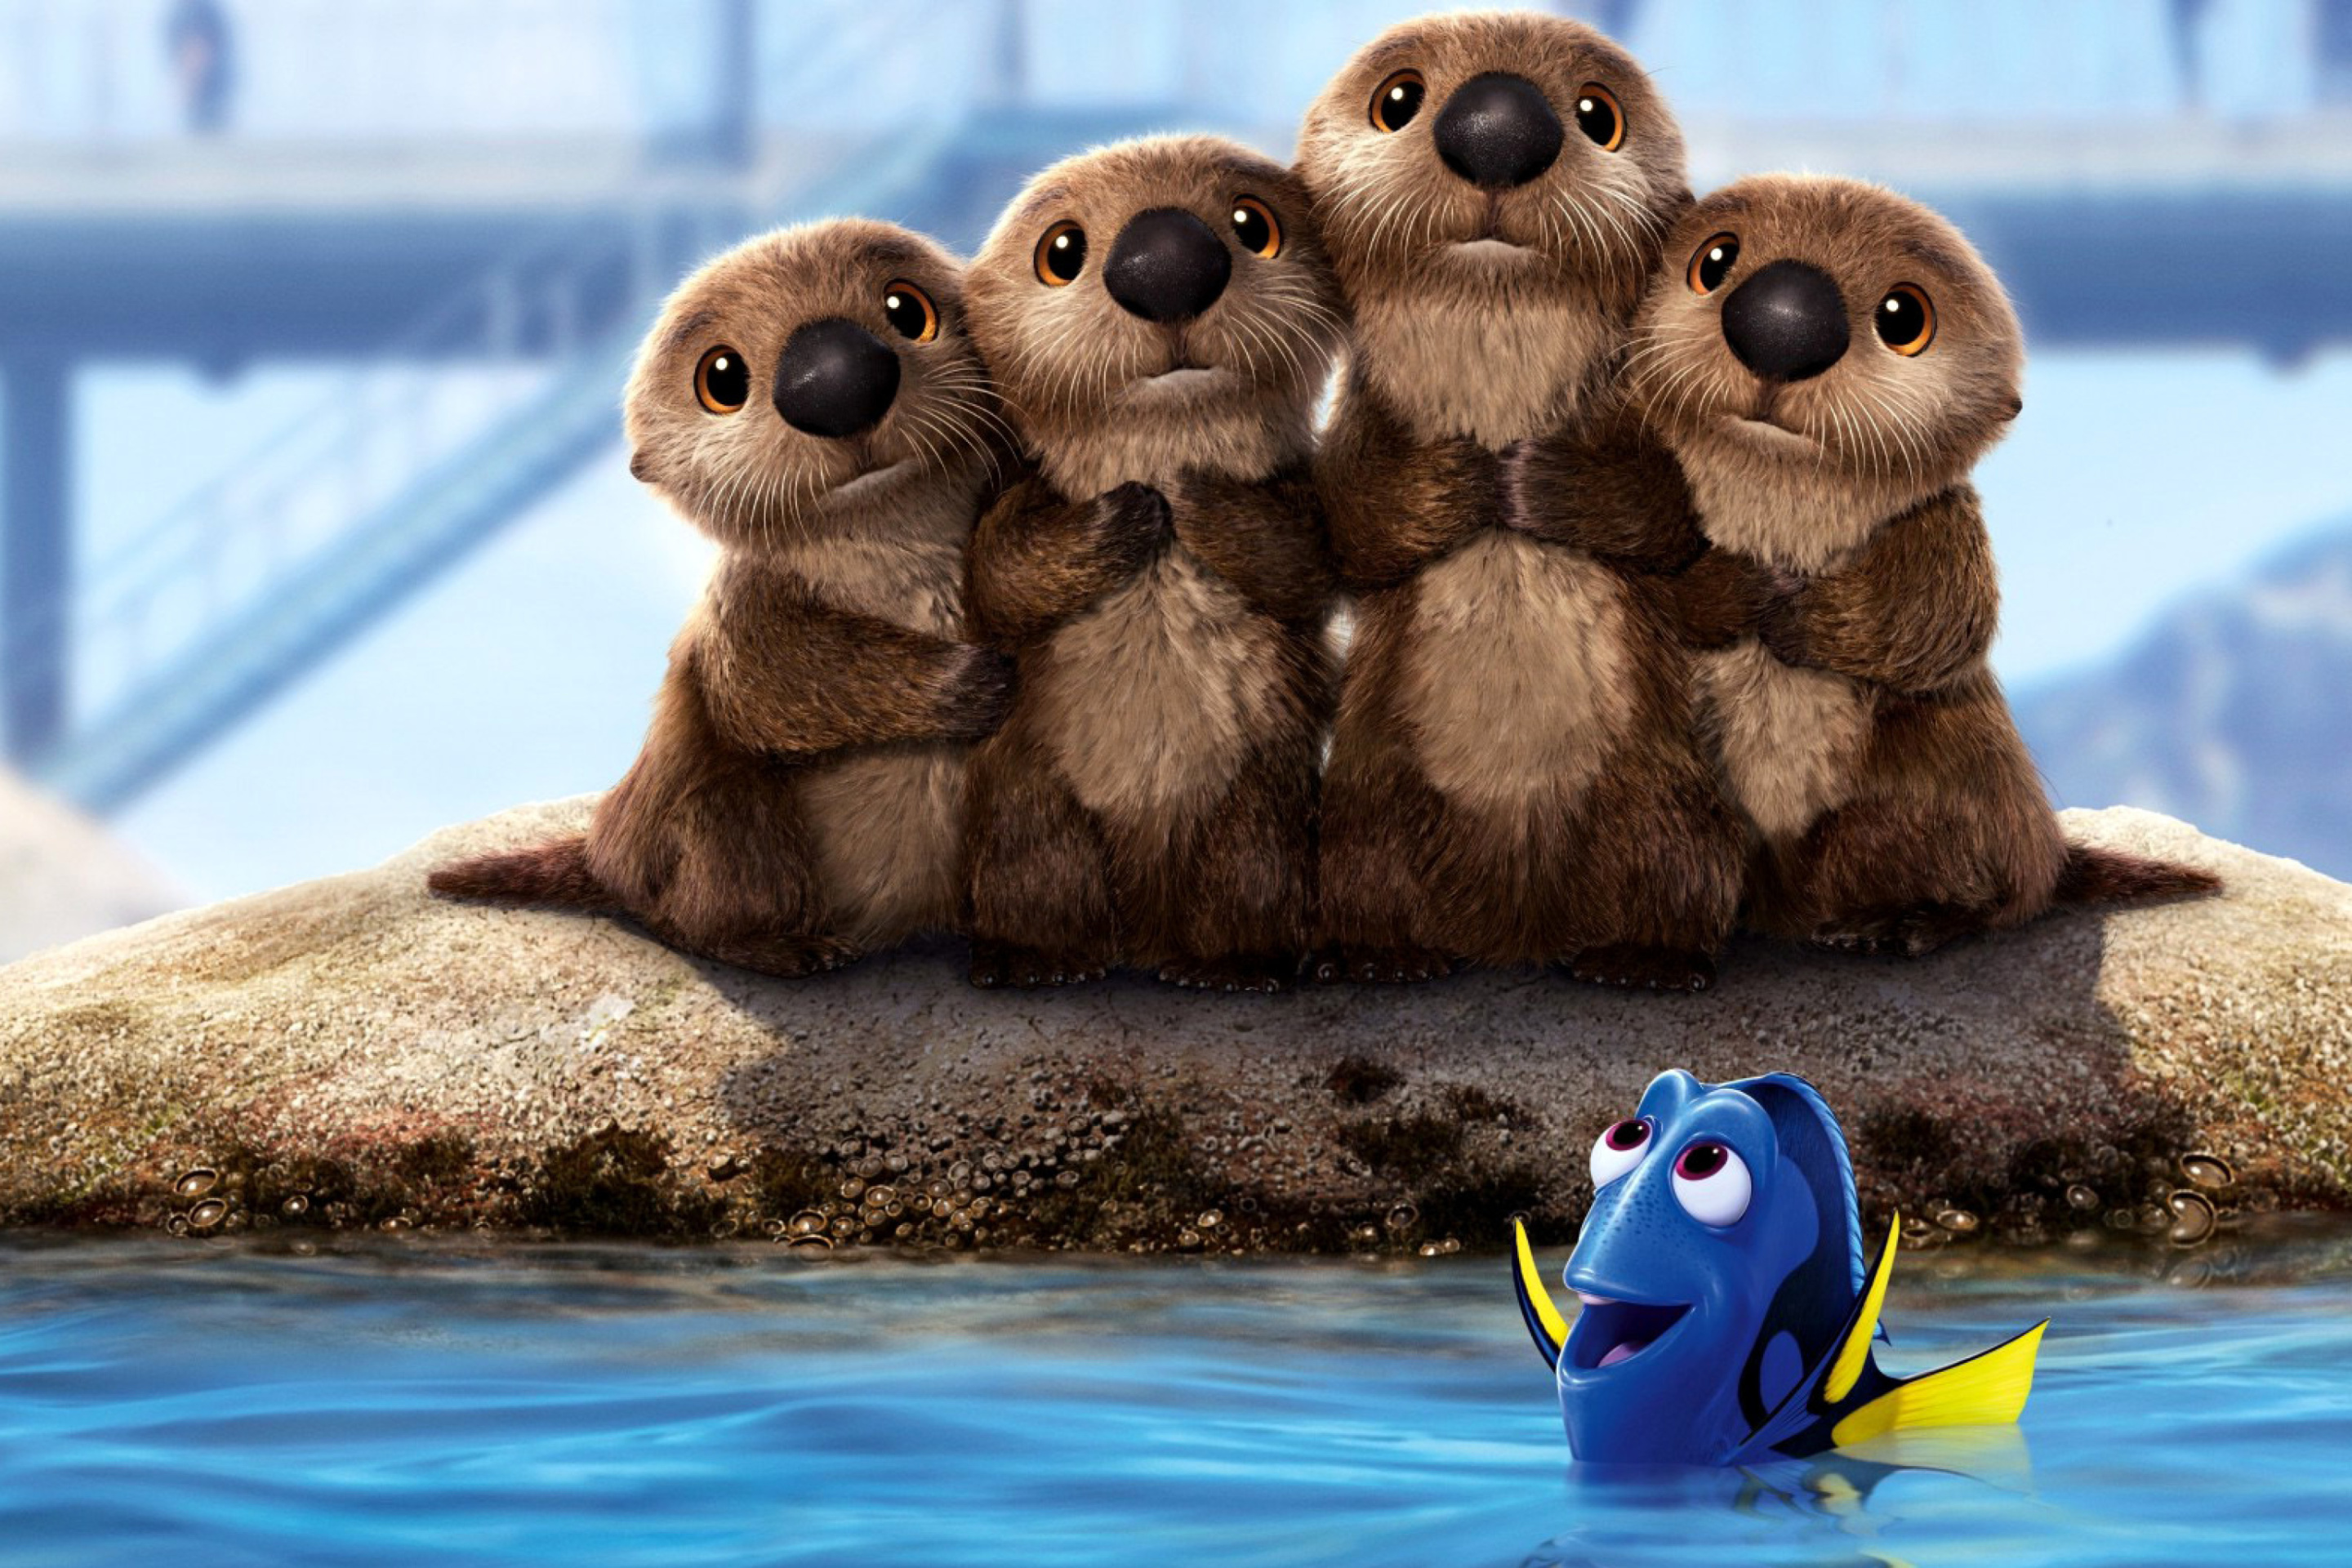 Finding Dory 3D Film with Beavers screenshot #1 2880x1920